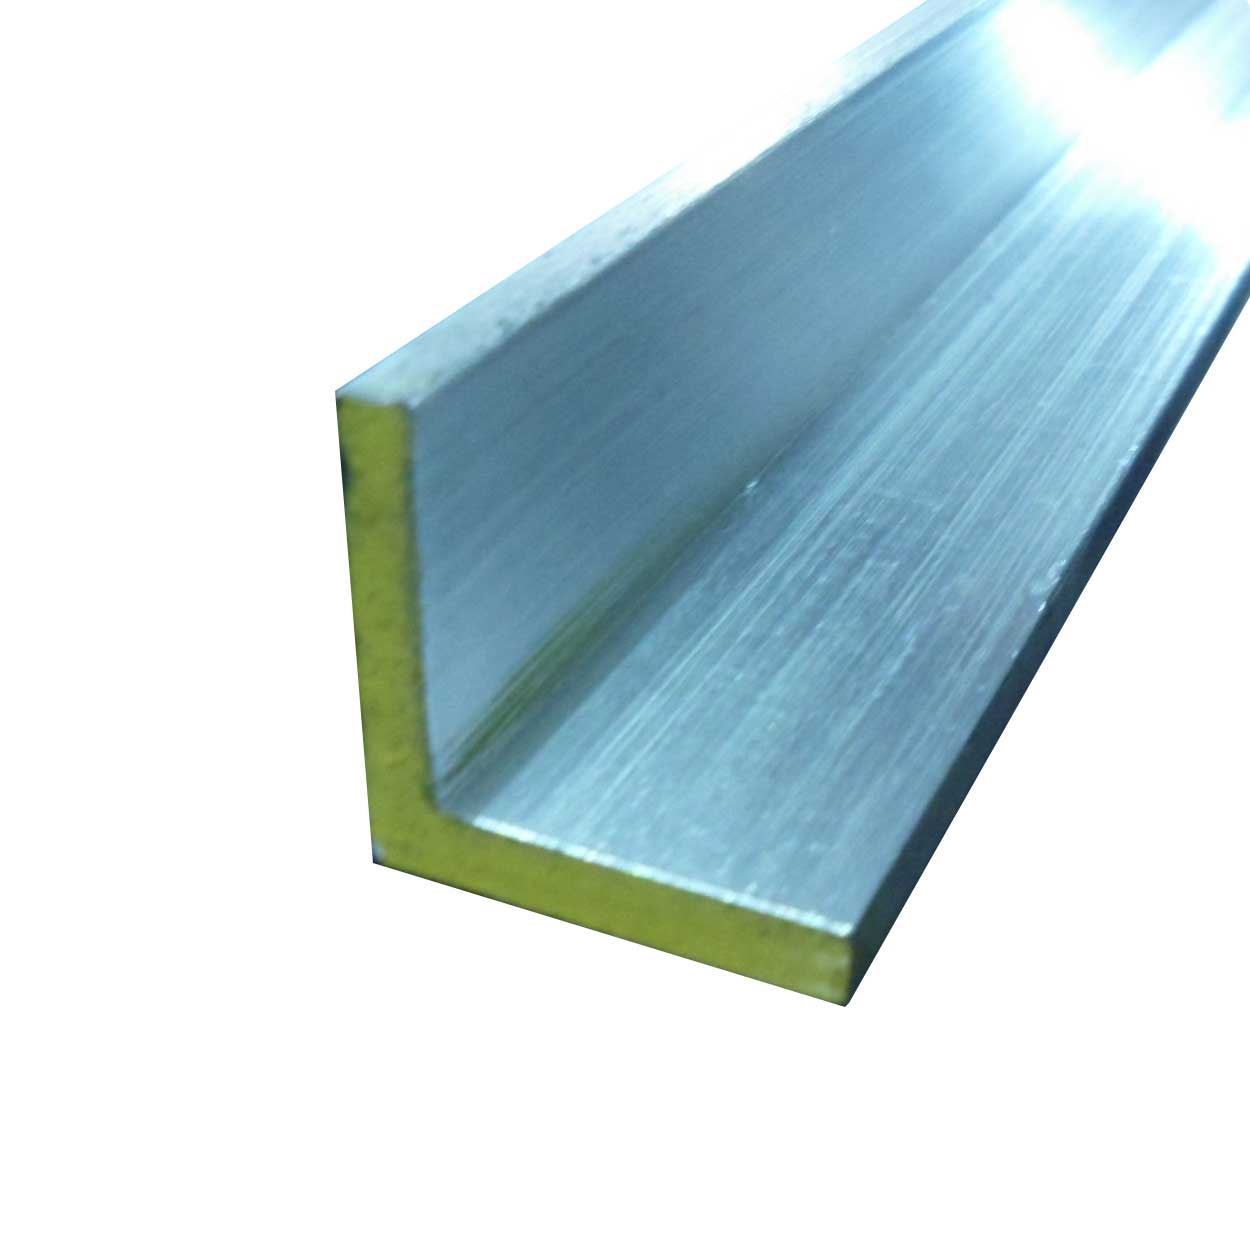 Online Metal Supply 6061-T6 Aluminum Angle 3 x 3 x 1/2 x 36 inches 